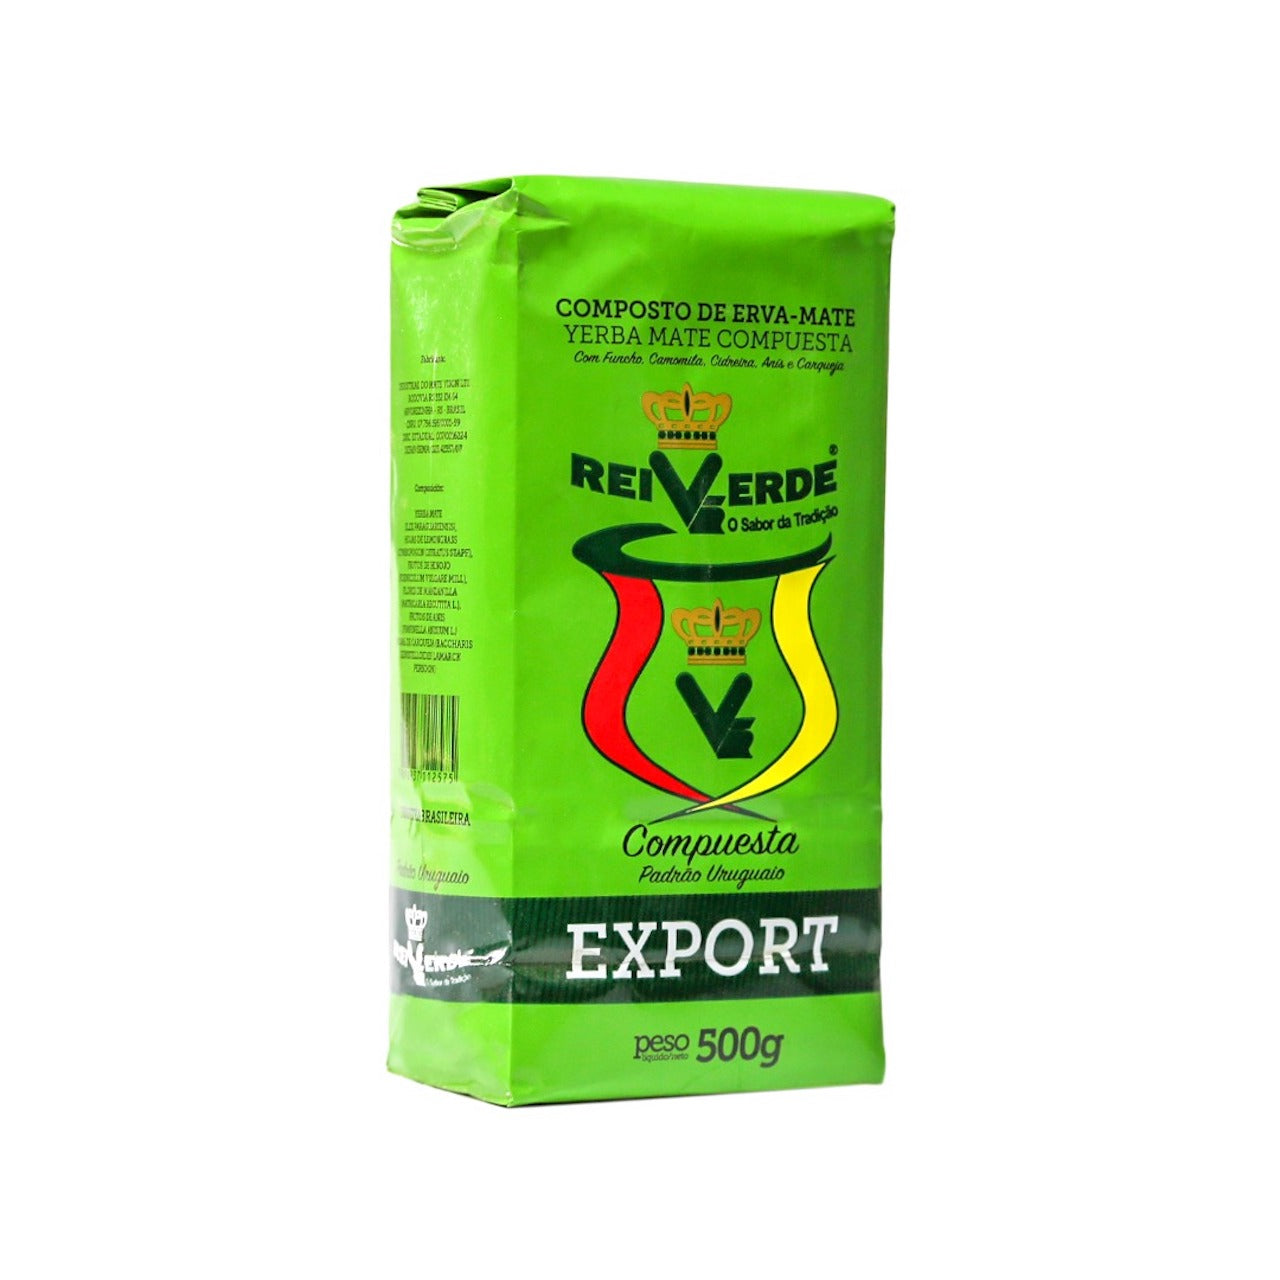 REI VERDE - Mate Mixed 500g - FINAL SALE - EXPIRED or CLOSE TO EXPIRY